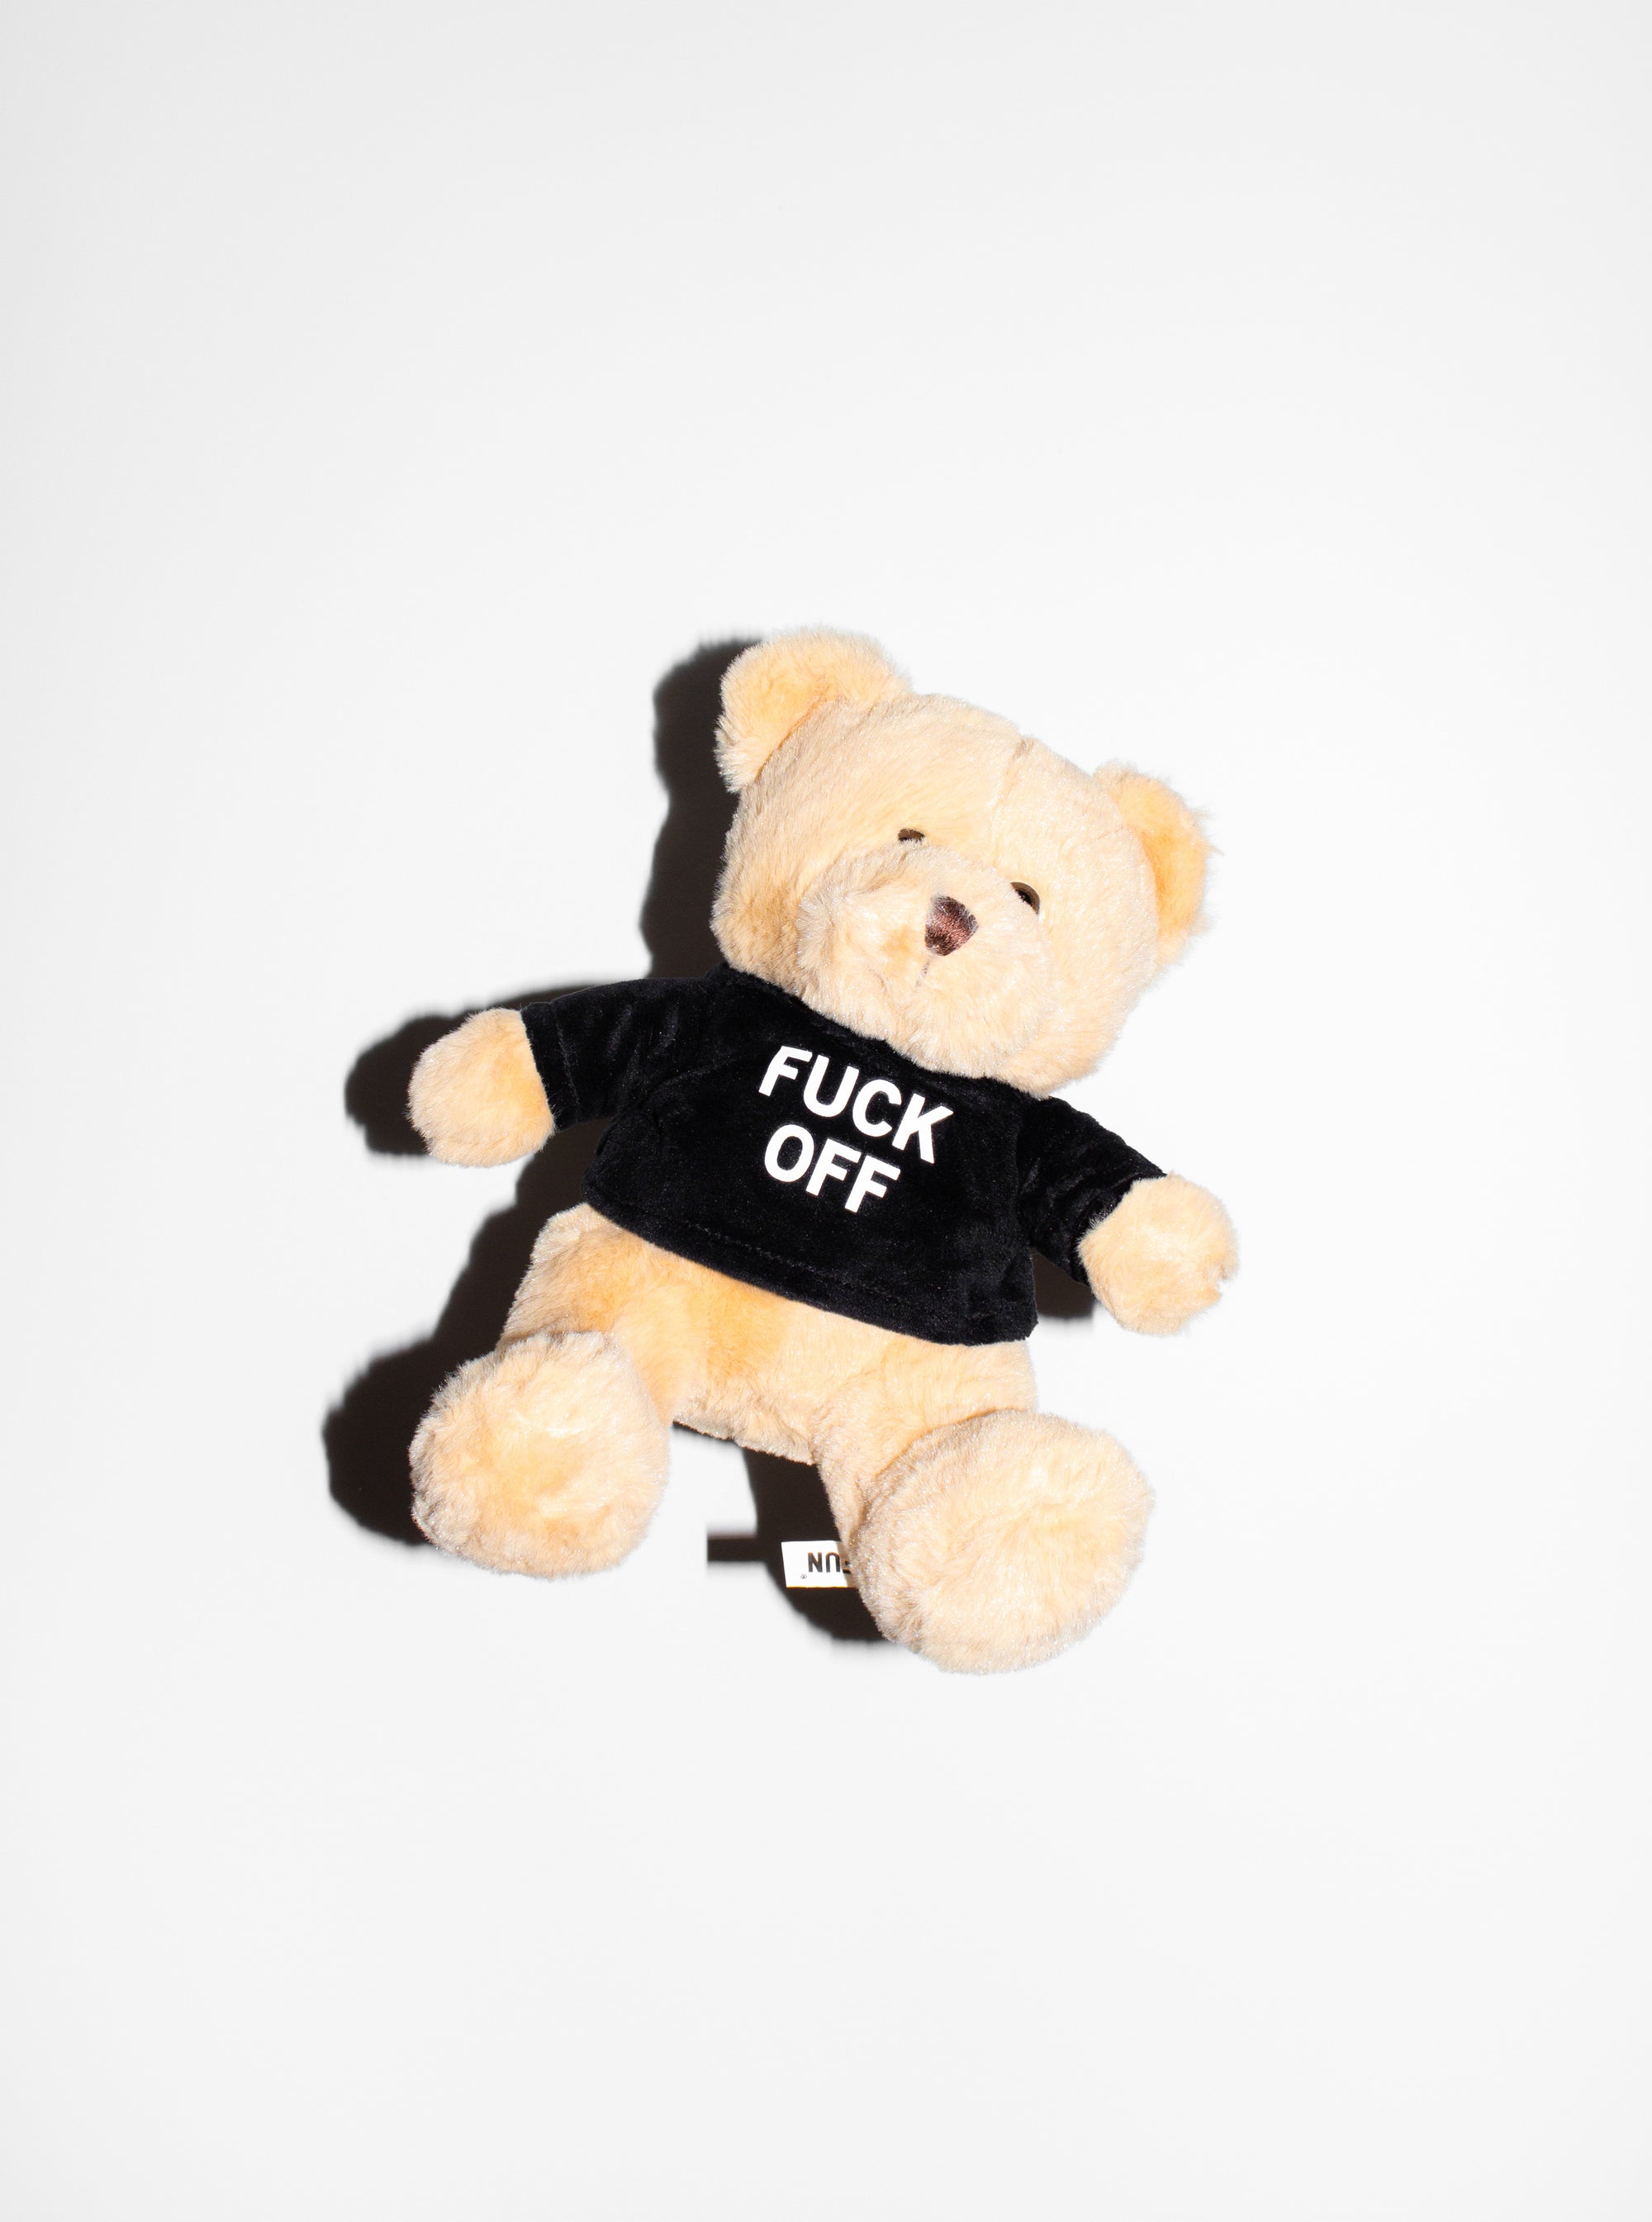 The "Friendly" Teddy Bear by No Fun®. Plush toy bear is beige and wears a black shirt with the phrase "FUCK OFF" printed on the front. Bear has a brown nose, and brown plastic eyes.  Bear is photographed floating against a white background.